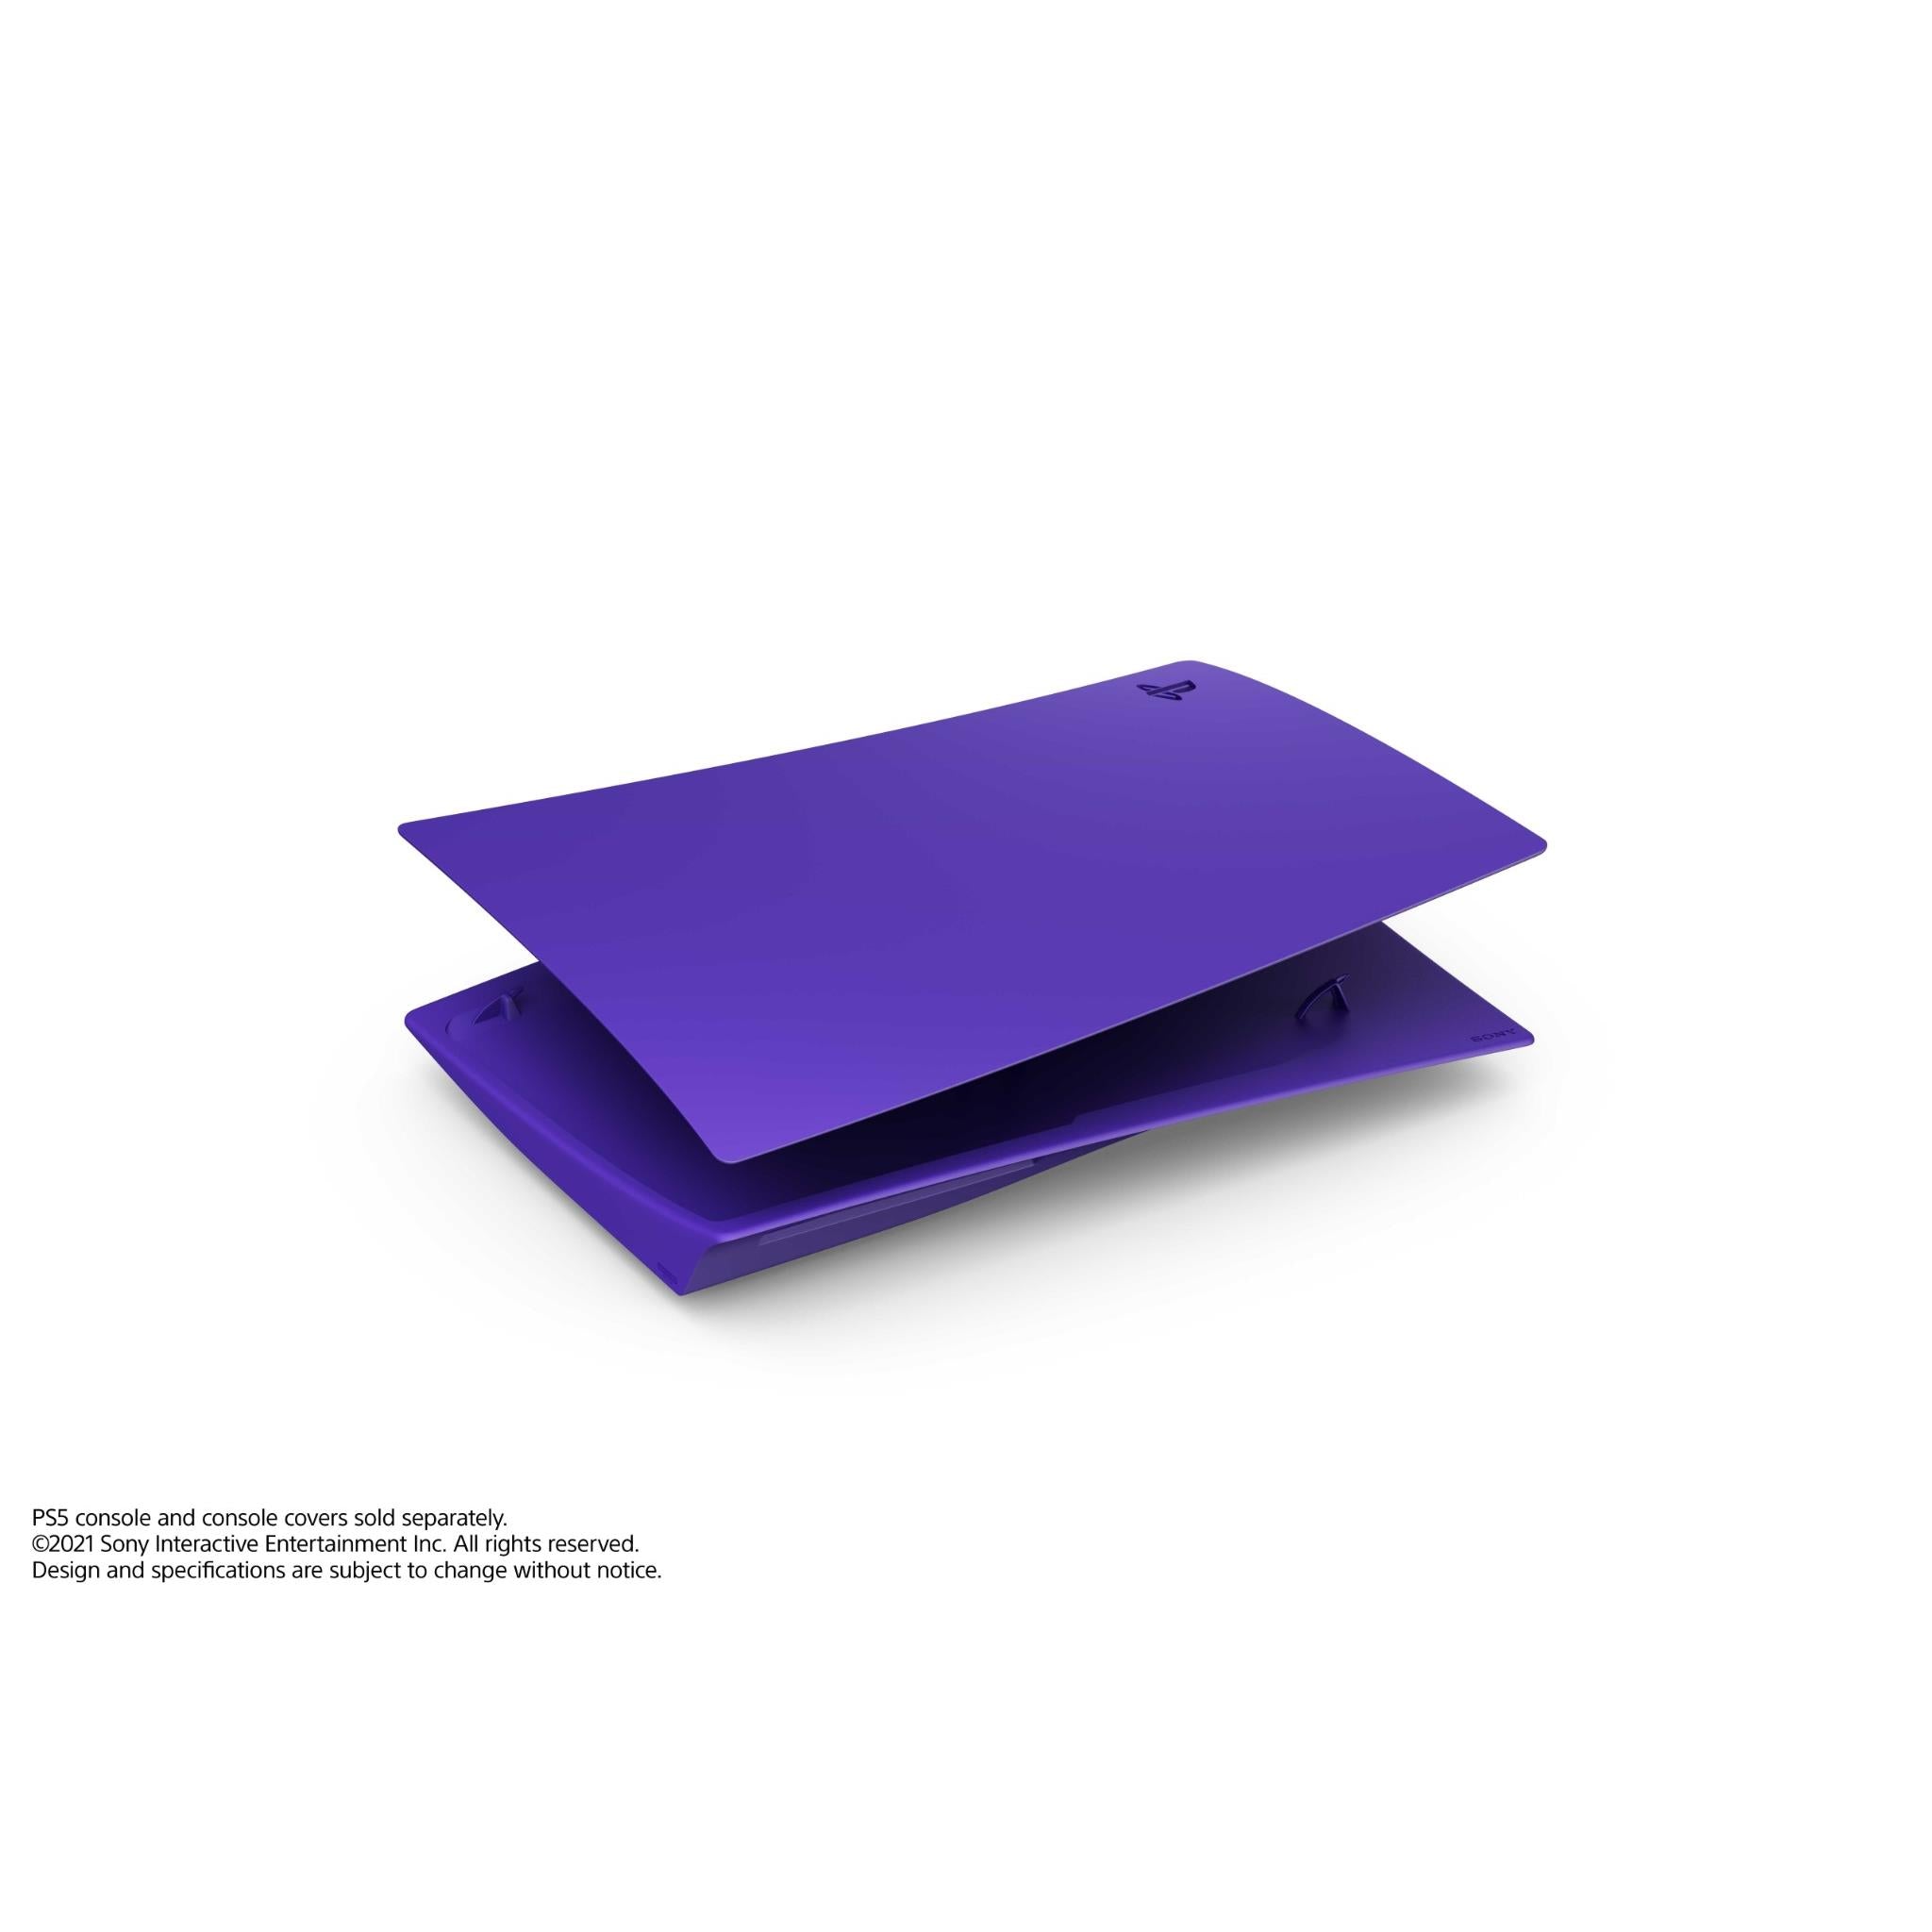 ps5 playstation 5 standard cover galactic purple